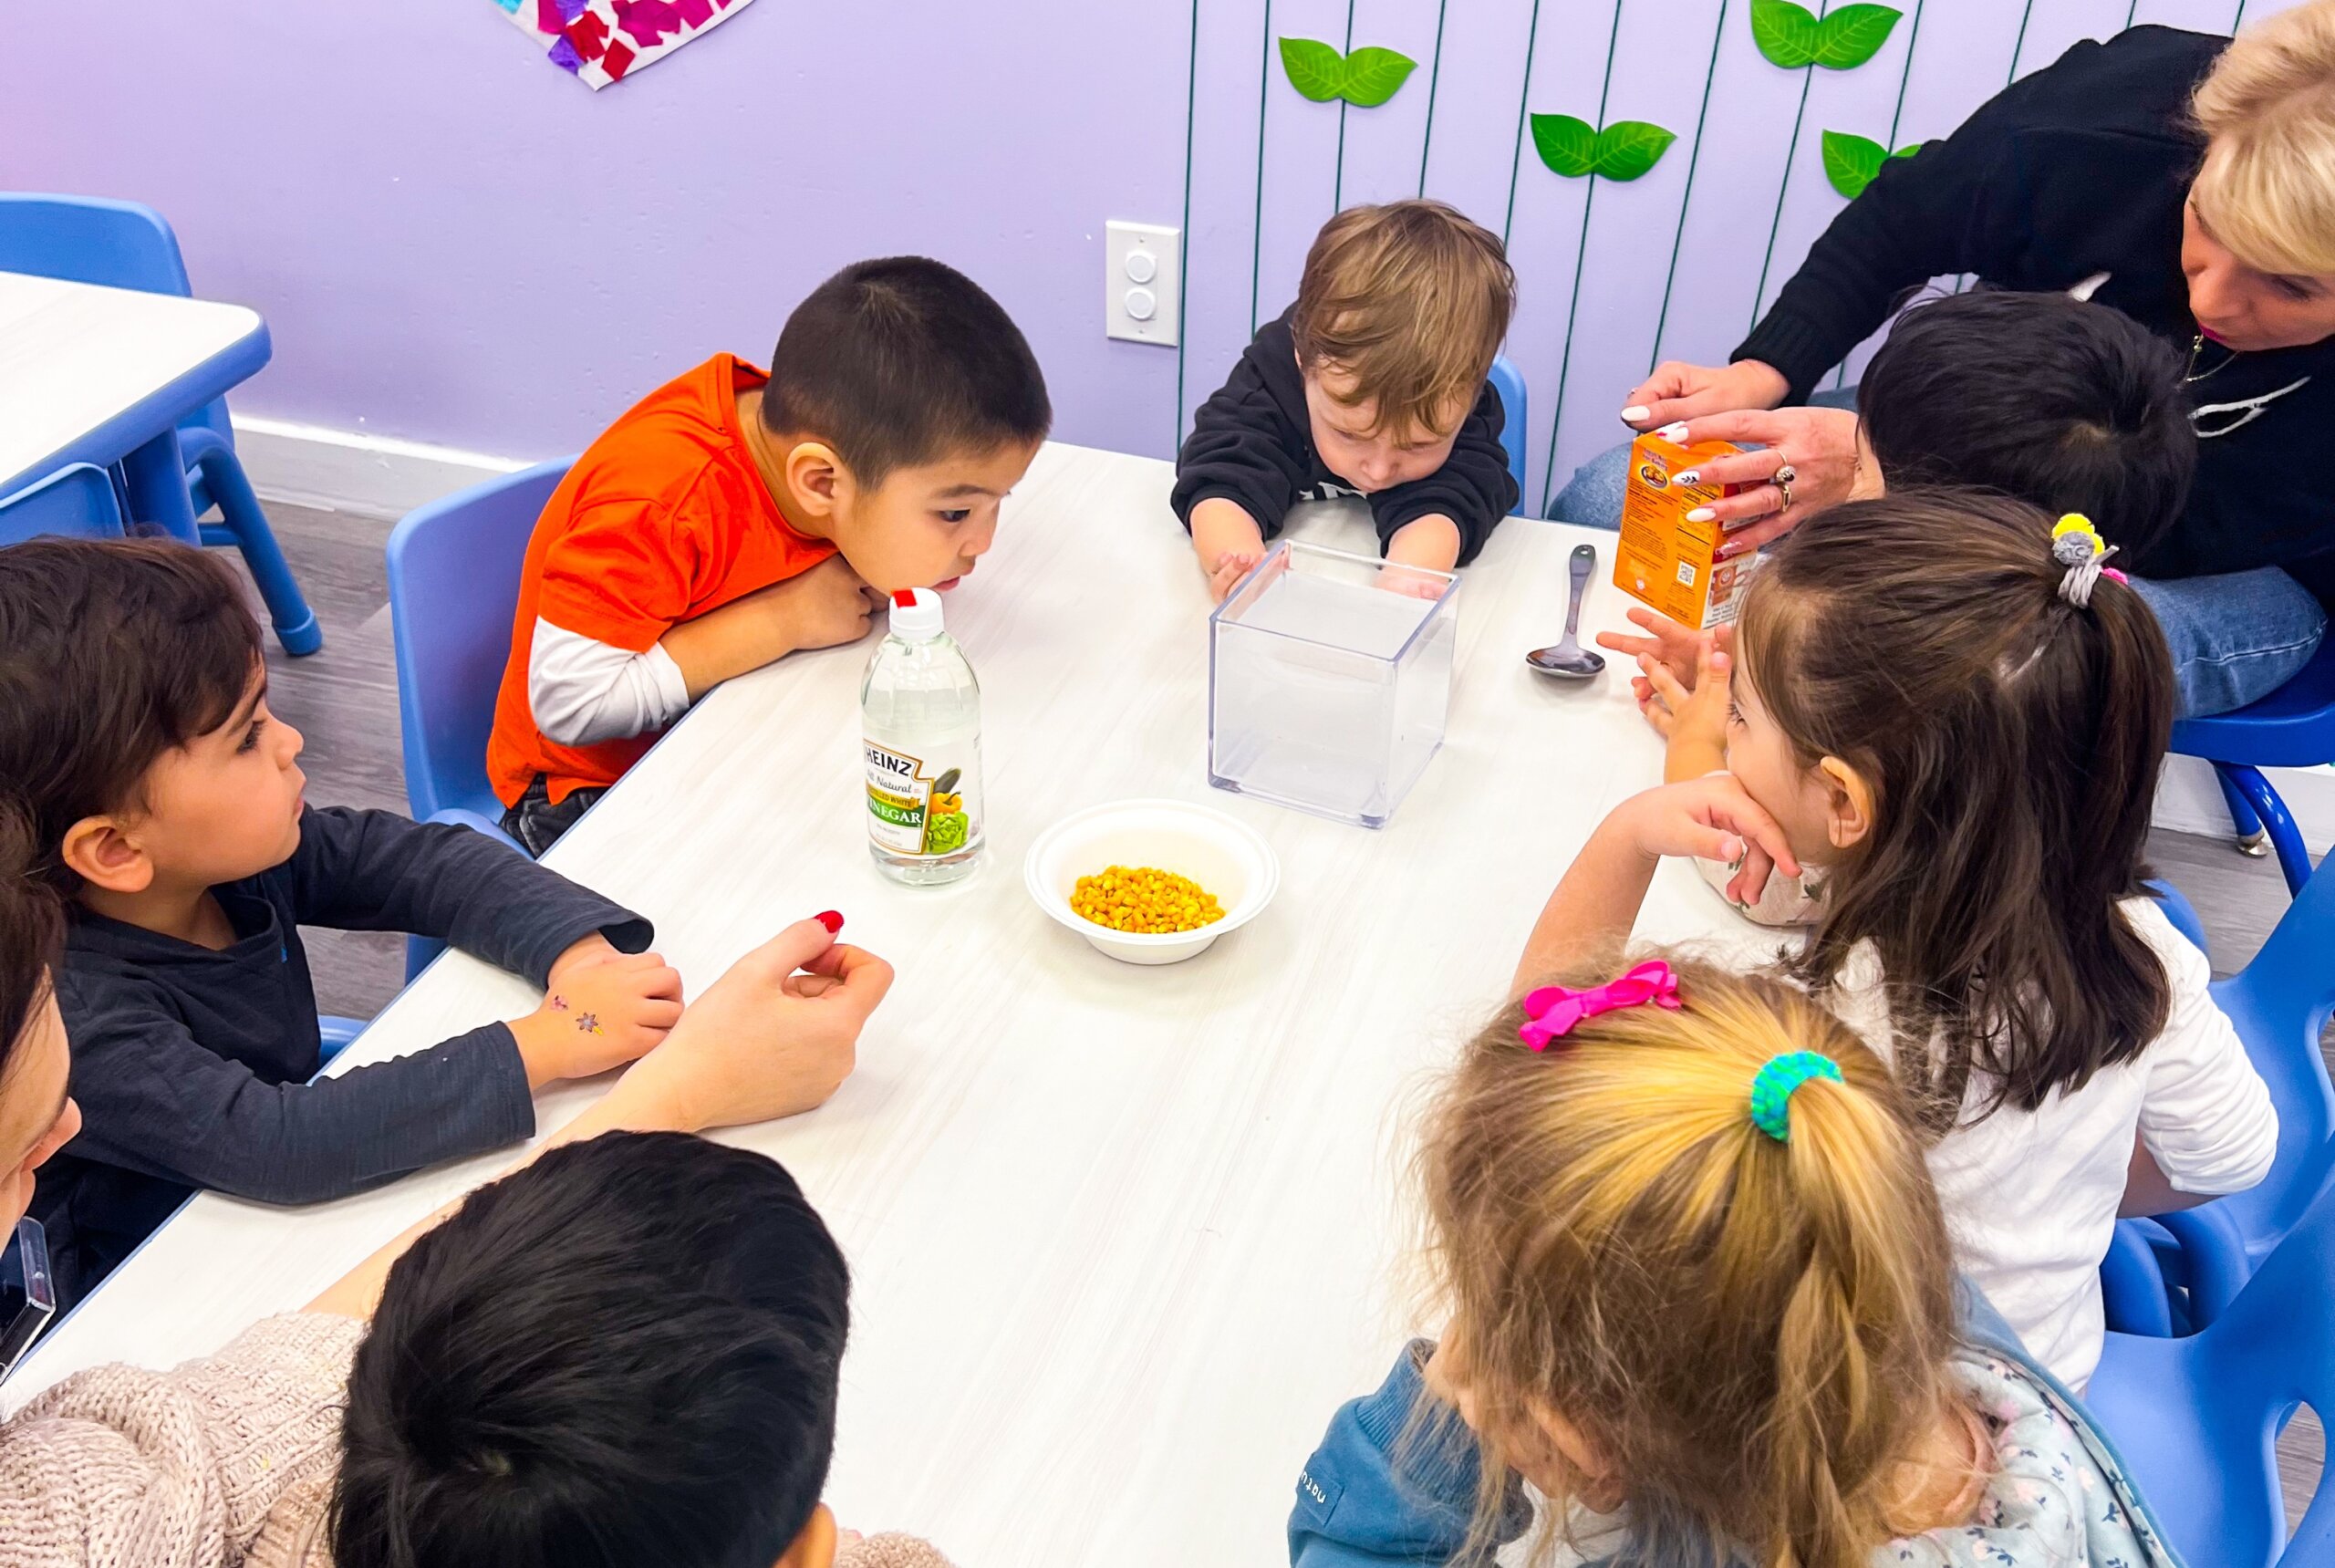 Group of young children gathered around a table, participating in a science experiment with vinegar and baking soda, supervised by an adult in a classroom with colorful decorations